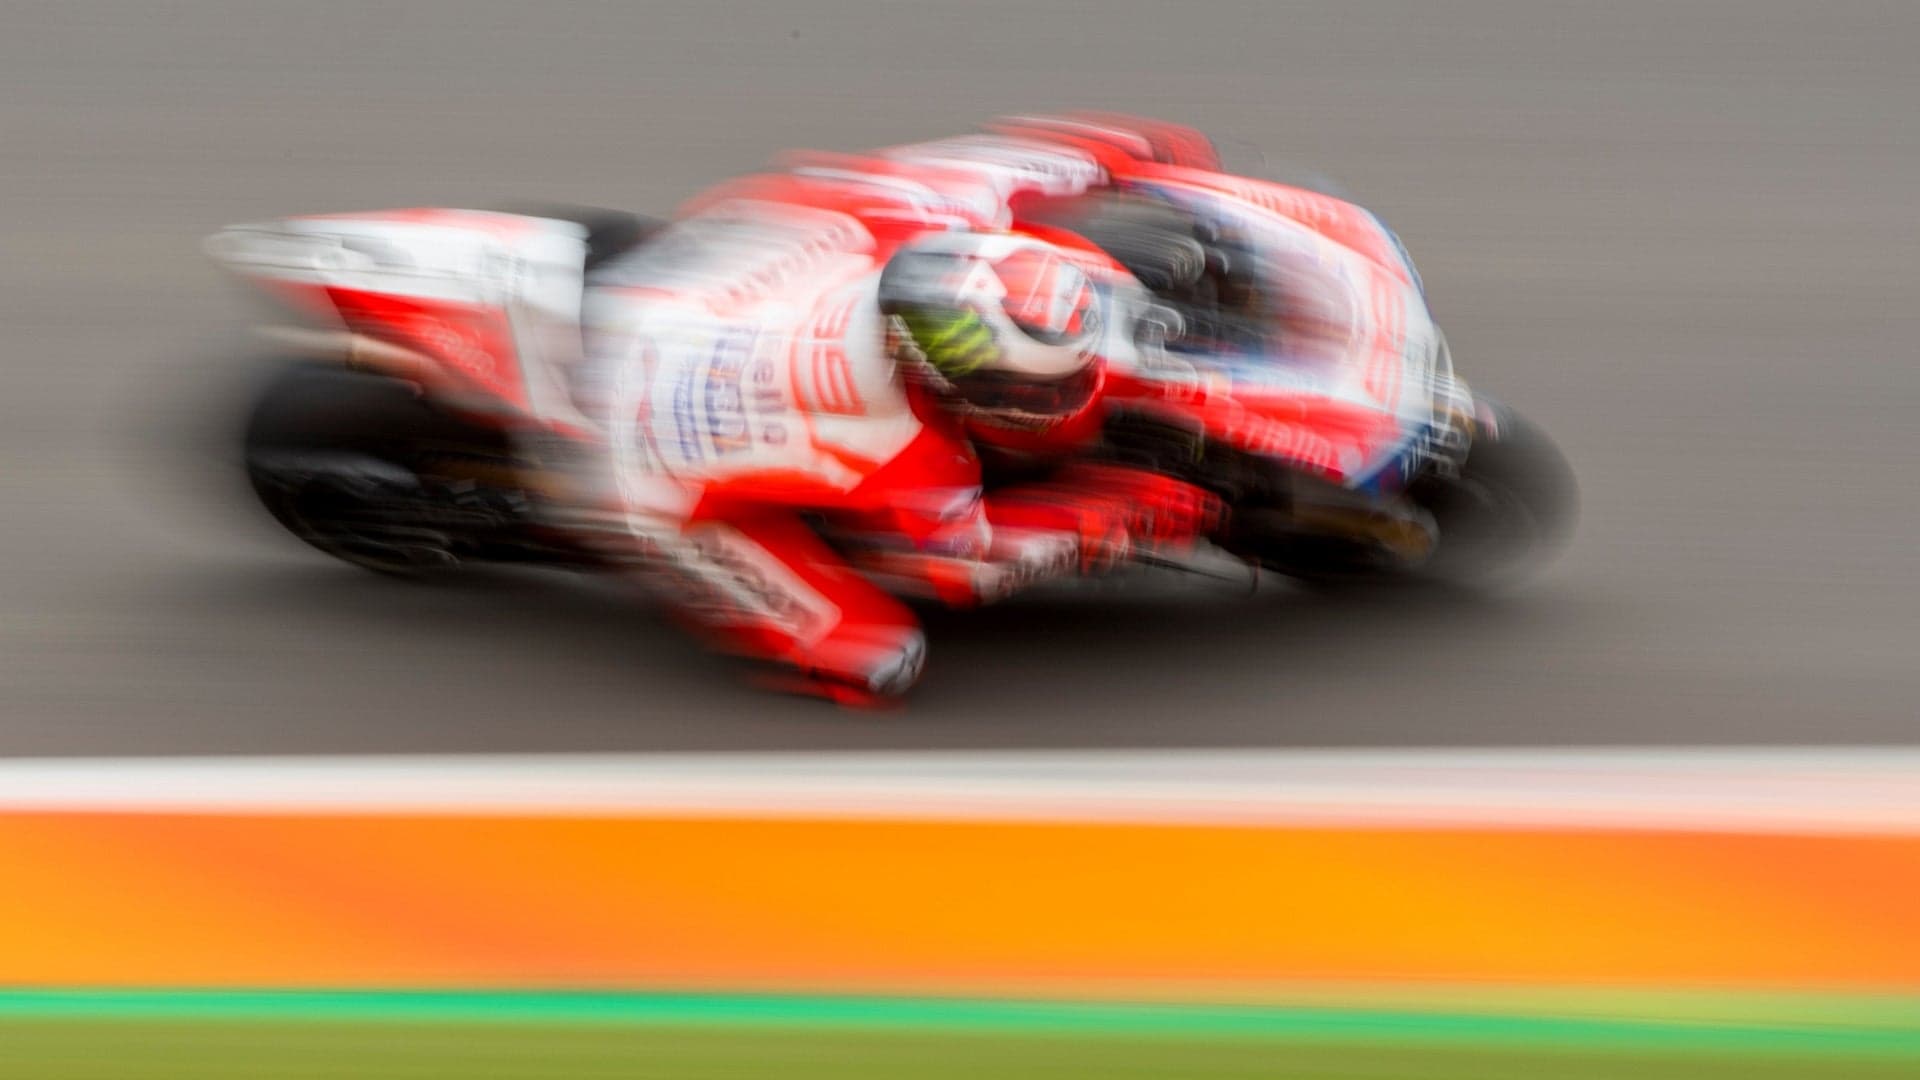 Here’s What We Know About the Rumored Ducati V-4 Superbike